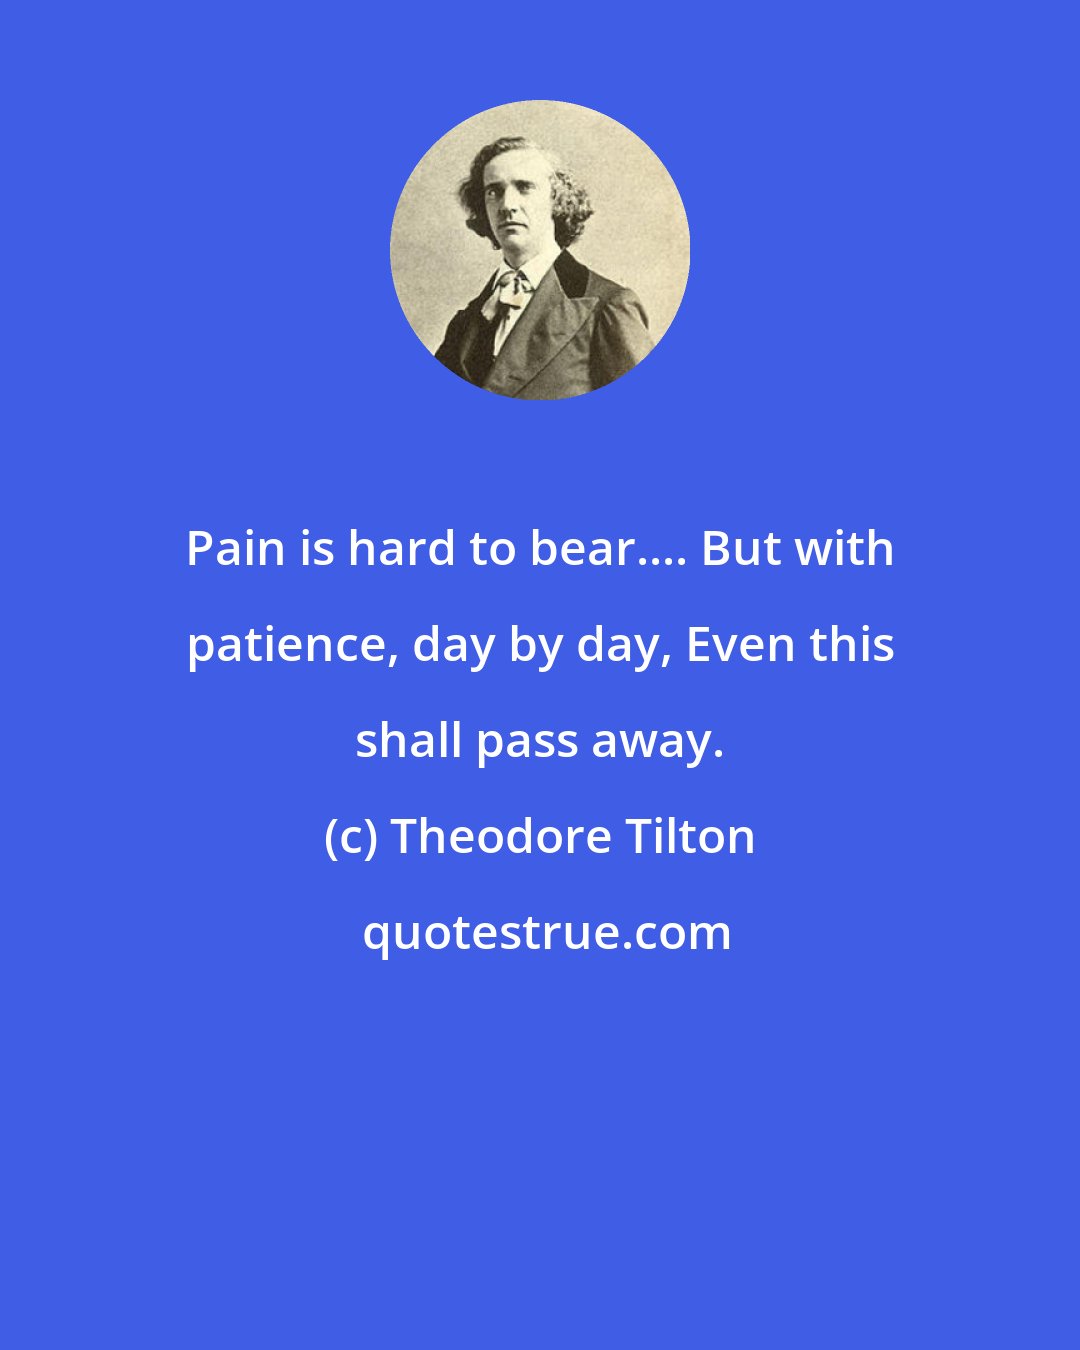 Theodore Tilton: Pain is hard to bear.... But with patience, day by day, Even this shall pass away.